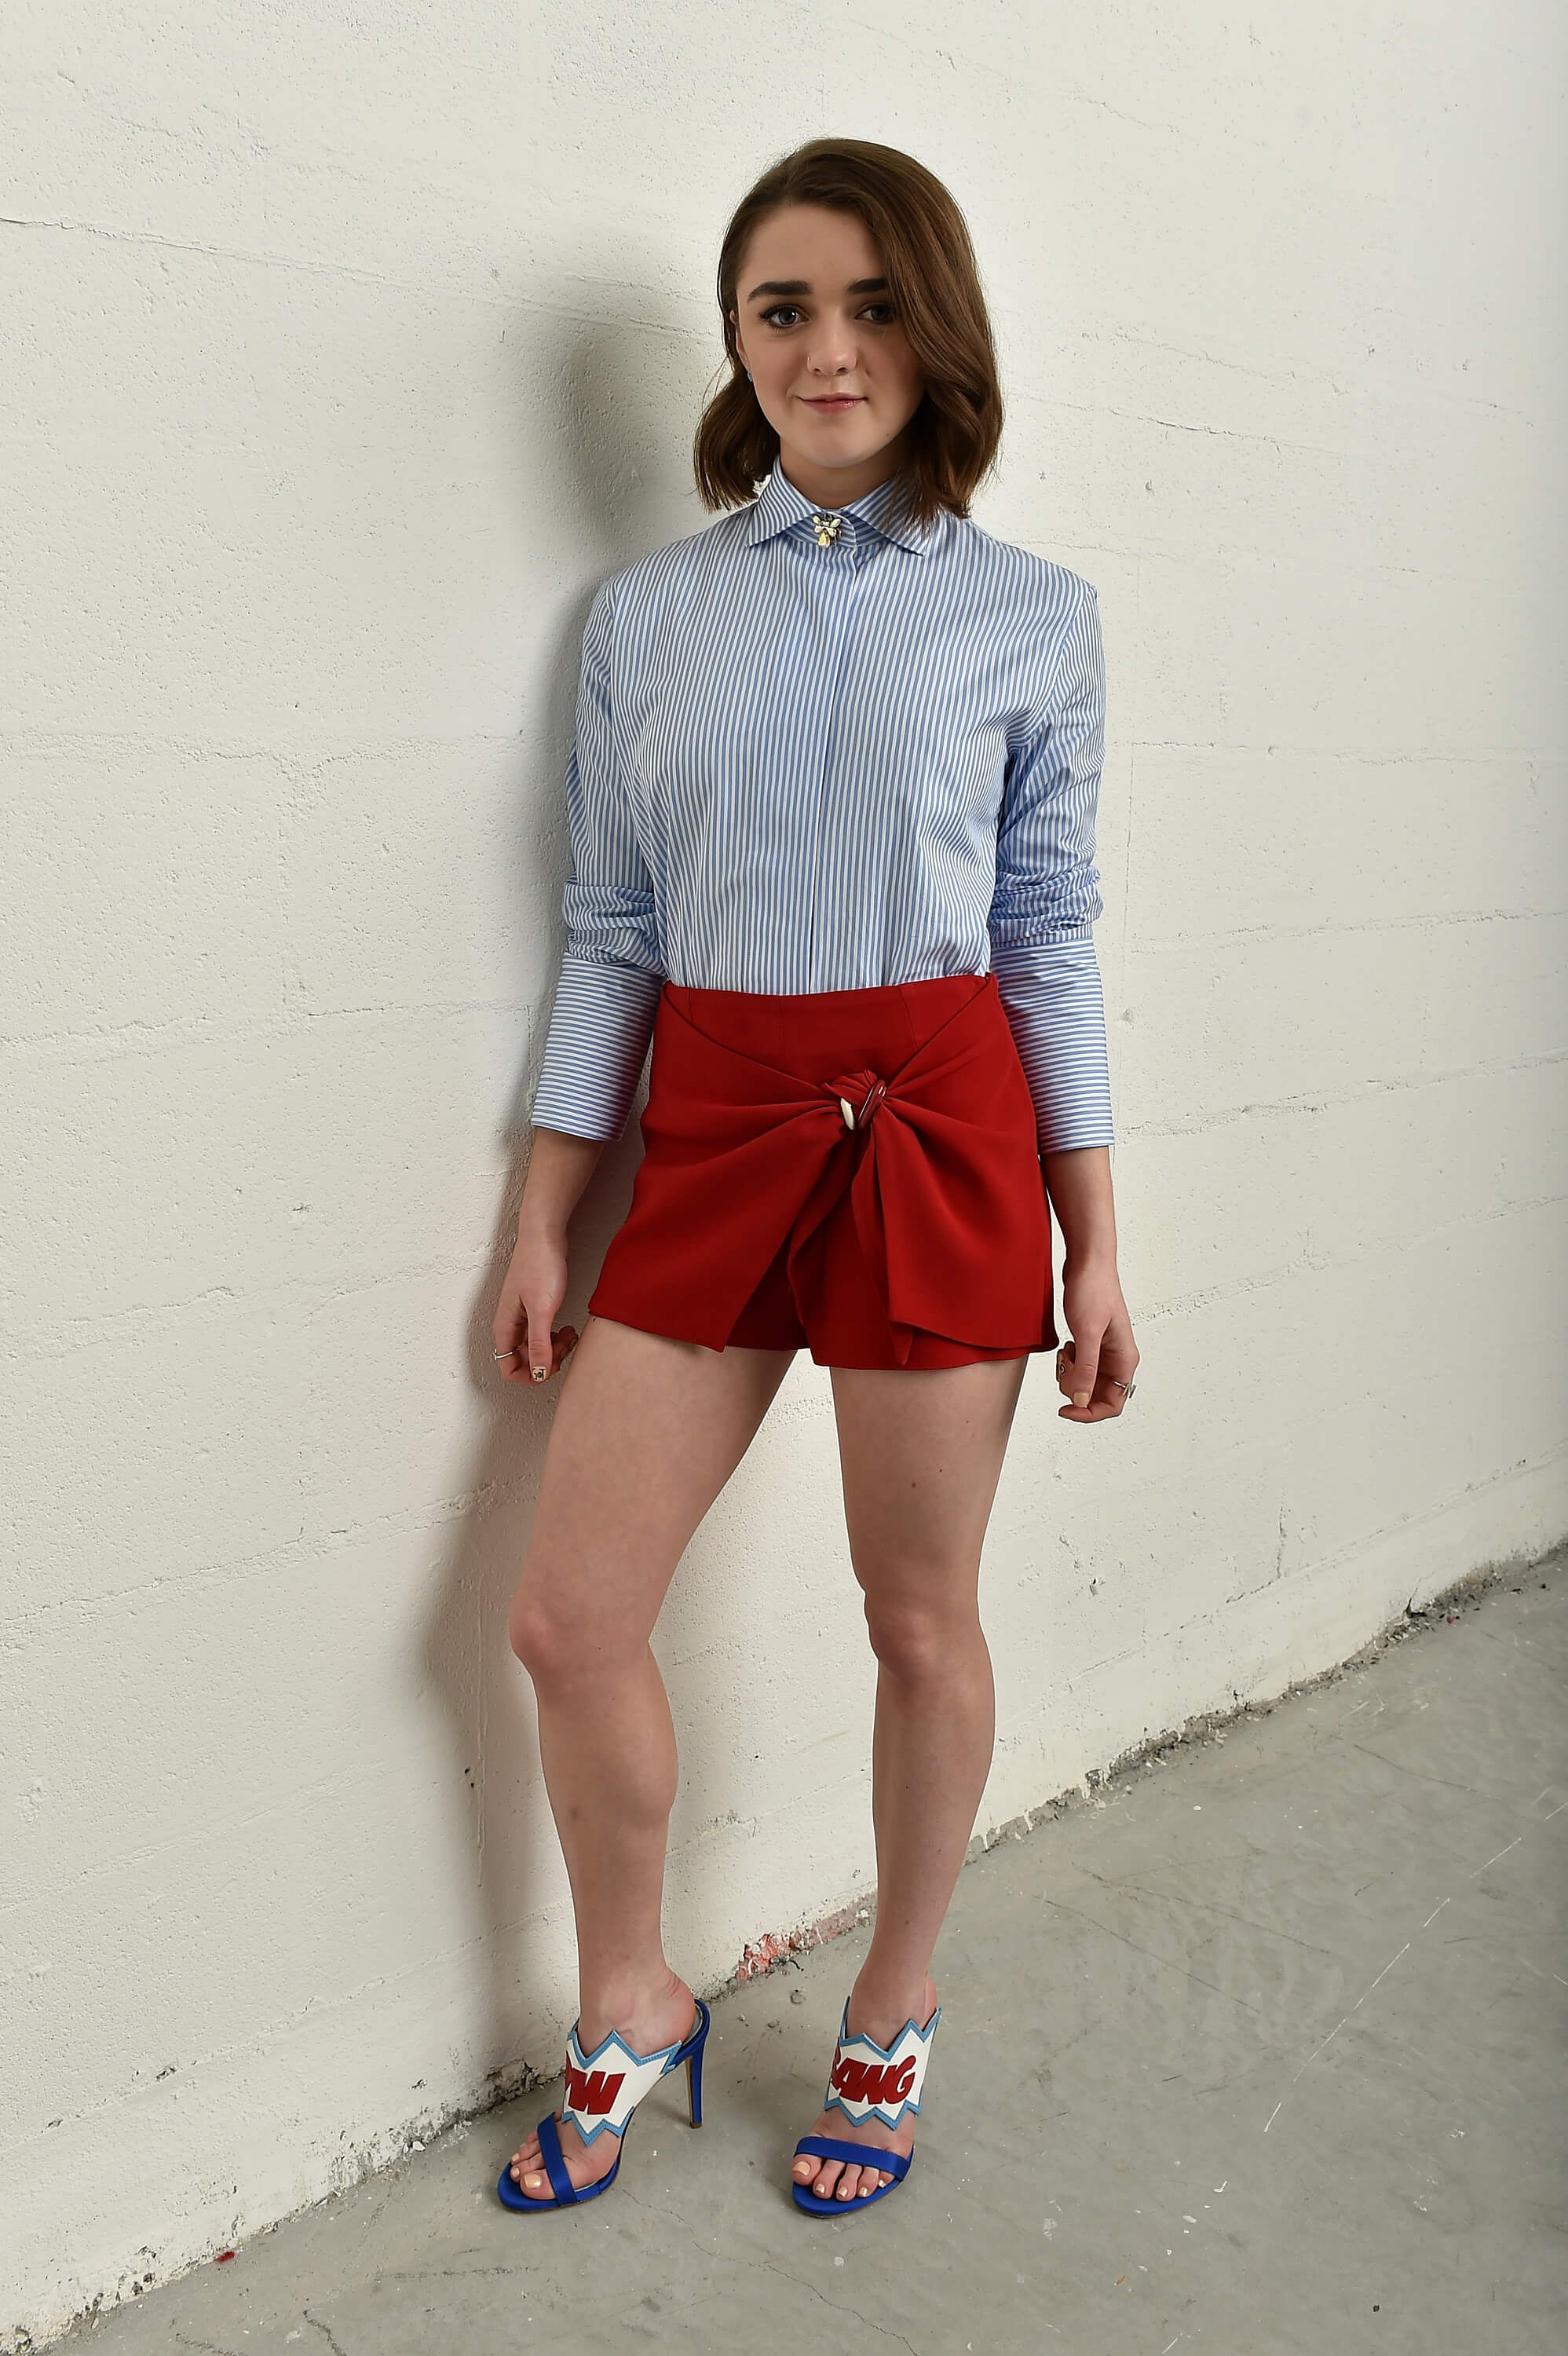 49 Hottest Maisie Williams Bikini Pictures Prove That She Is As Sexy As